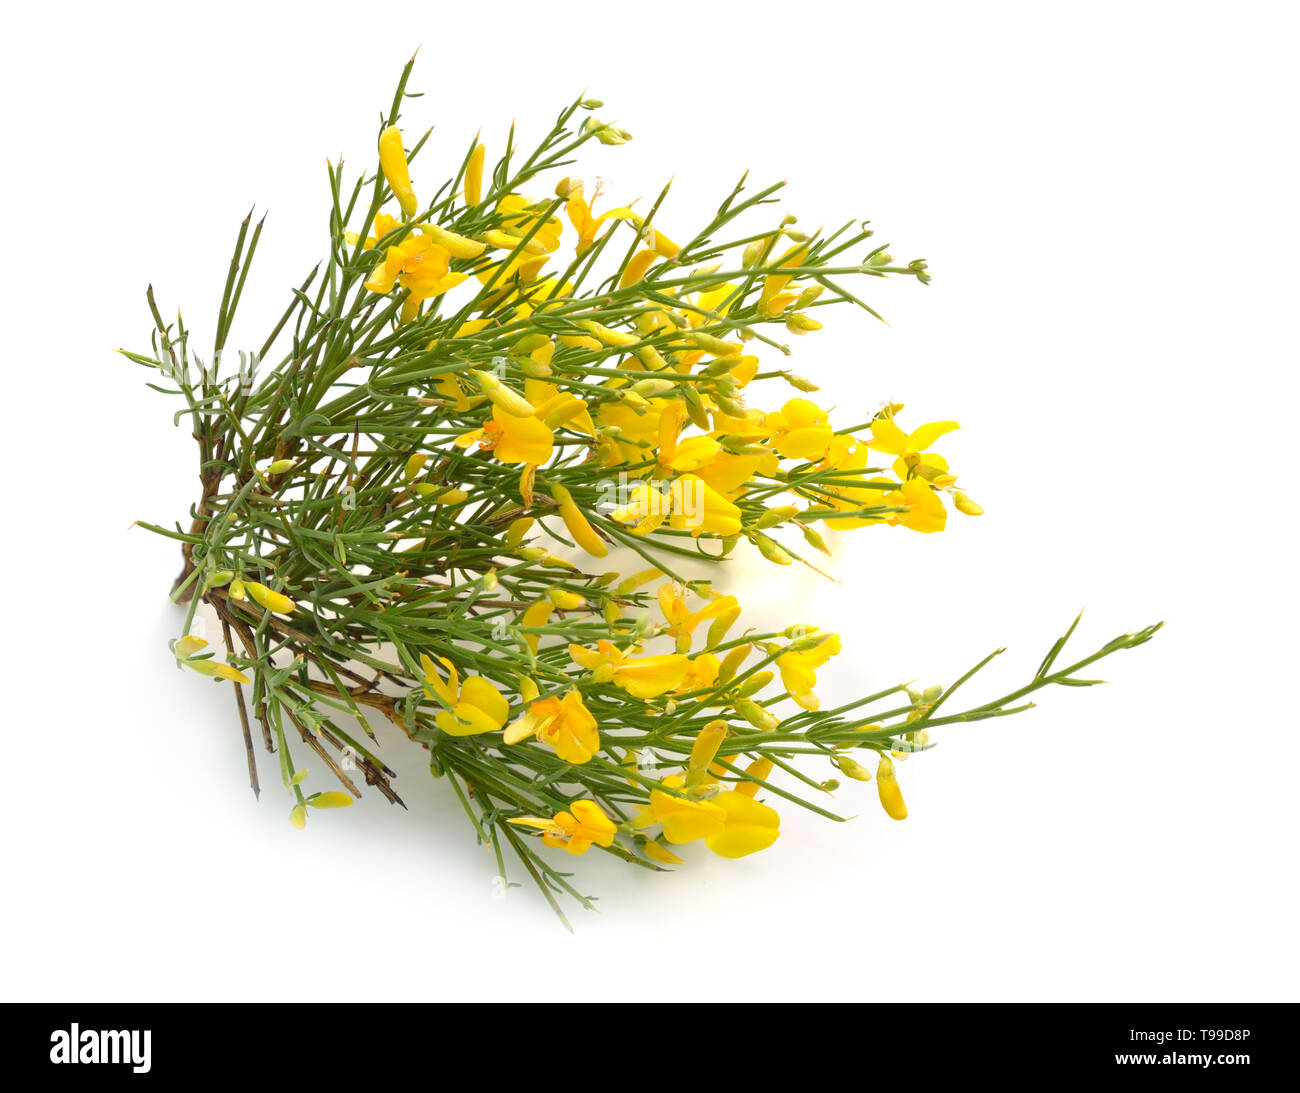 Genista corsica flowers isolated on white background. Stock Photo